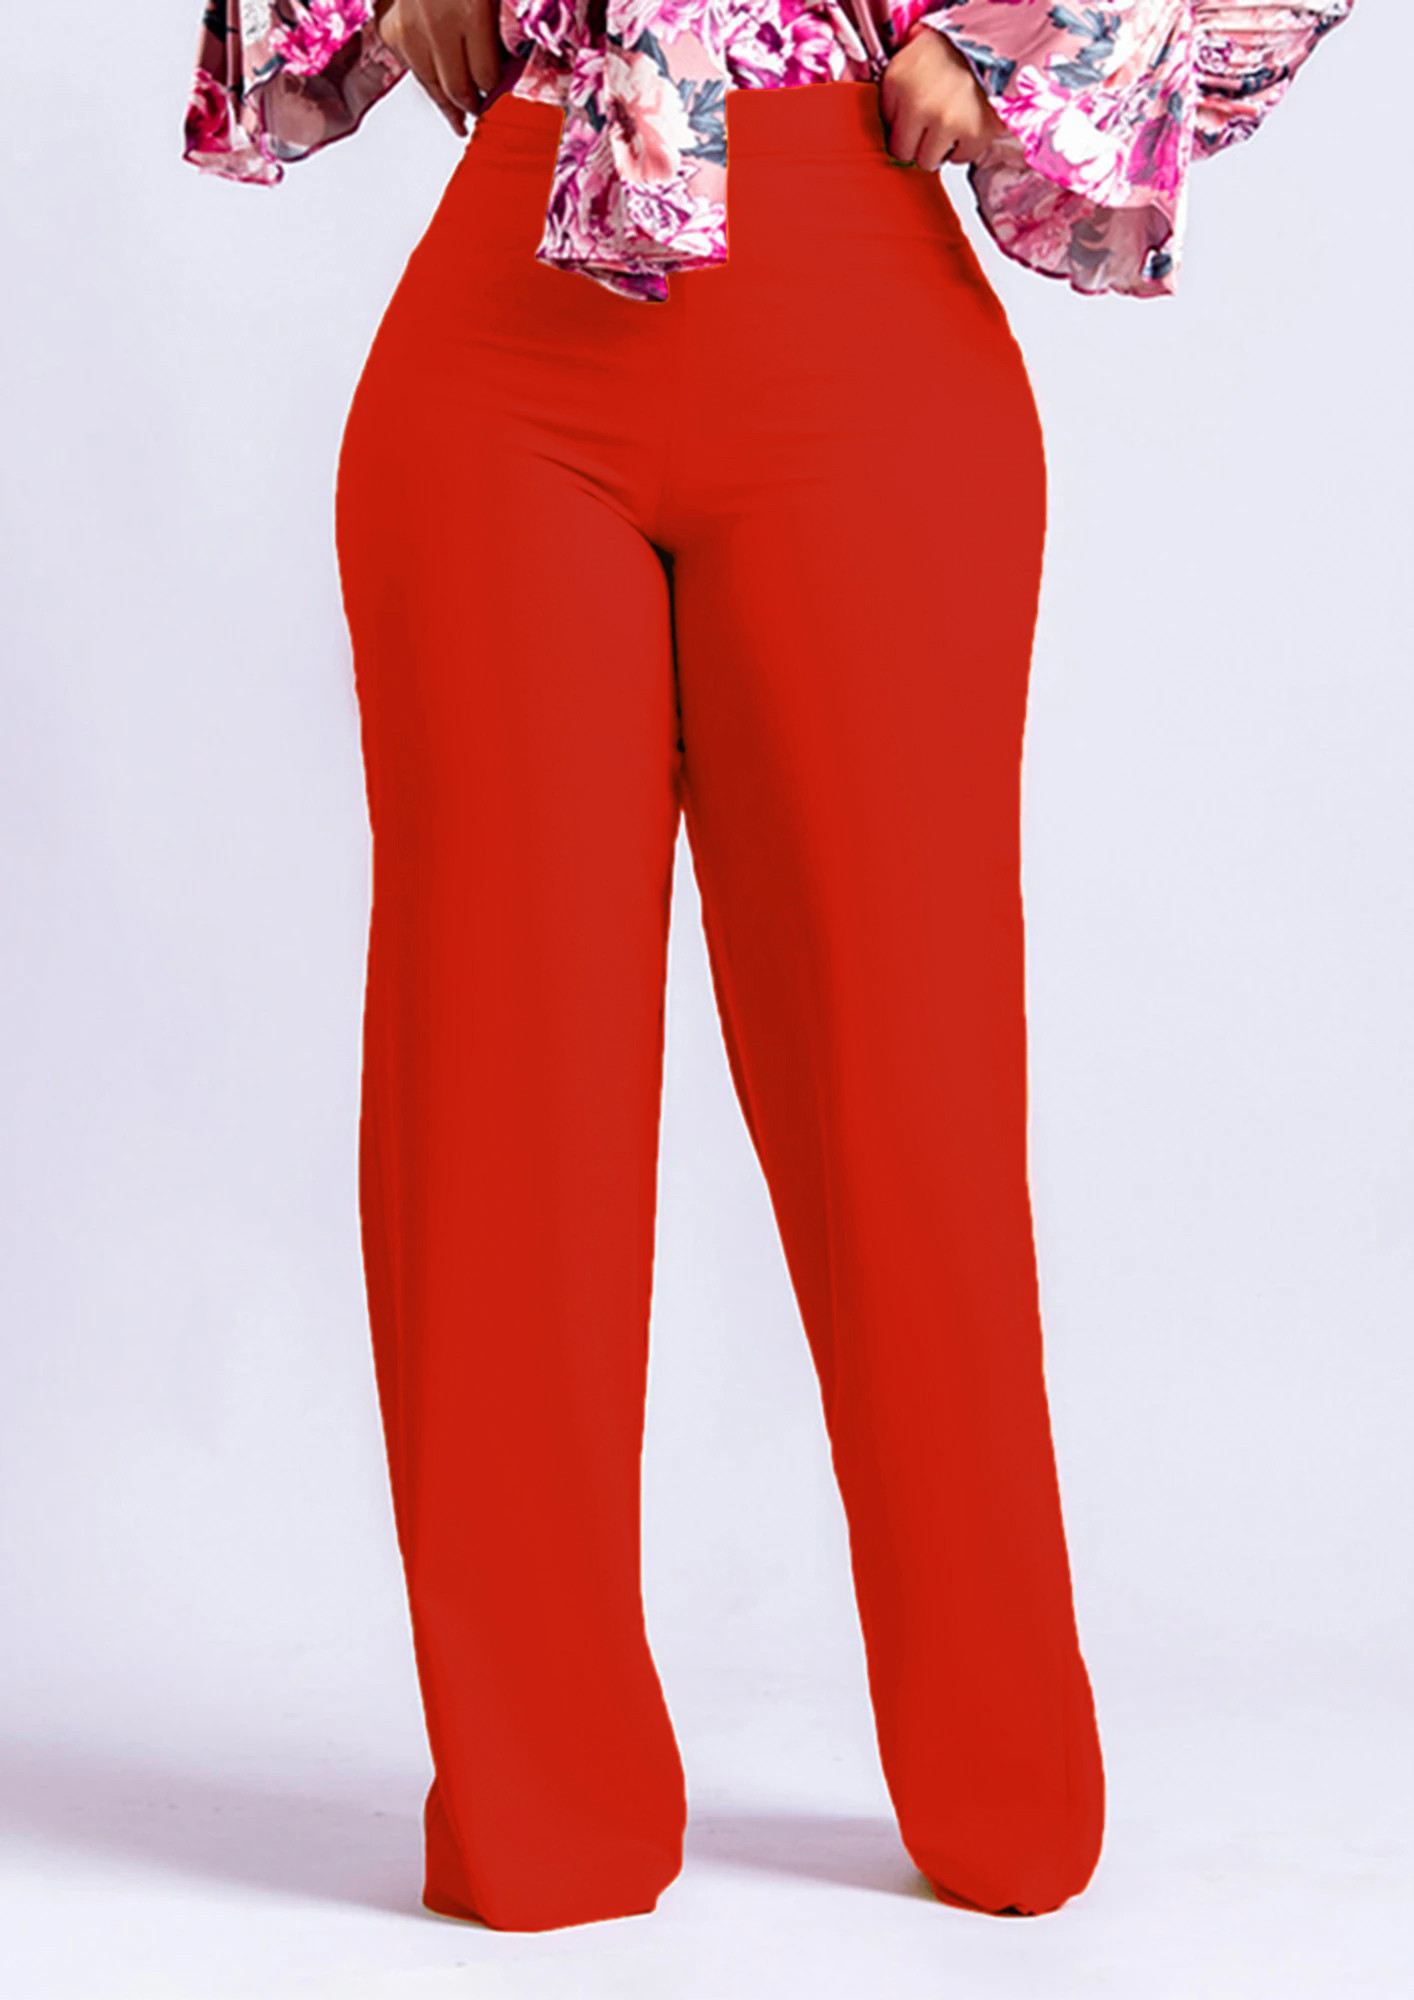 Red Wide Leg Pants  Fall Style  The Hunter Collector  Red wide leg  pants Red trousers outfit Fall fashion outfits